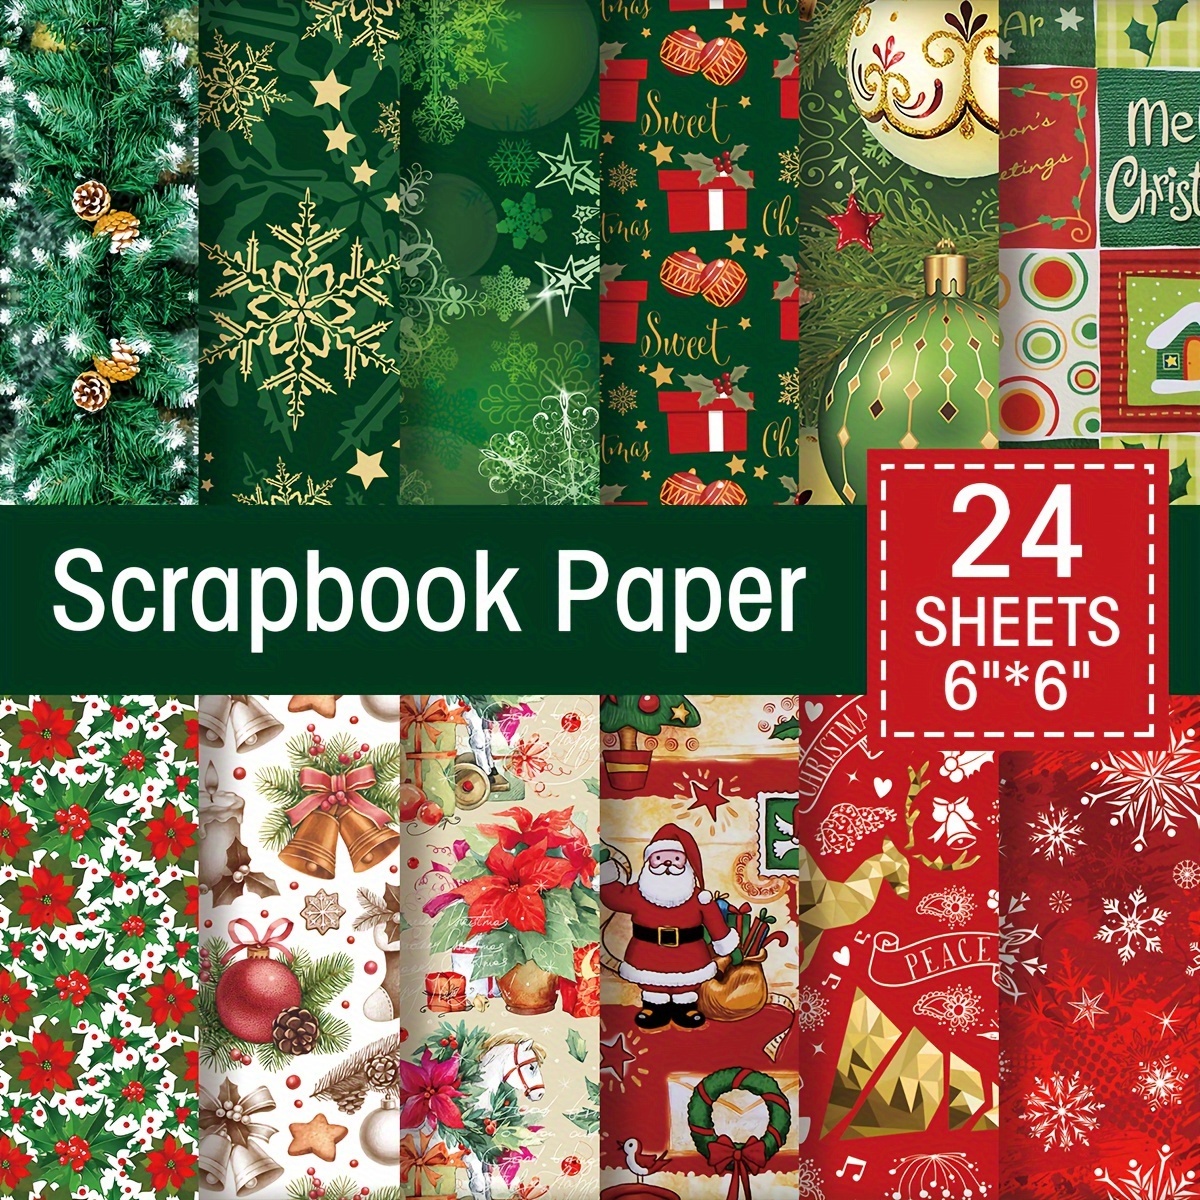 500 Sheets Christmas Vintage Scrapbook Paper Journaling Supplies Xmas  Aesthetic Decorative Stationery Scrapbooking Paper for Travel Journal Art  Craft